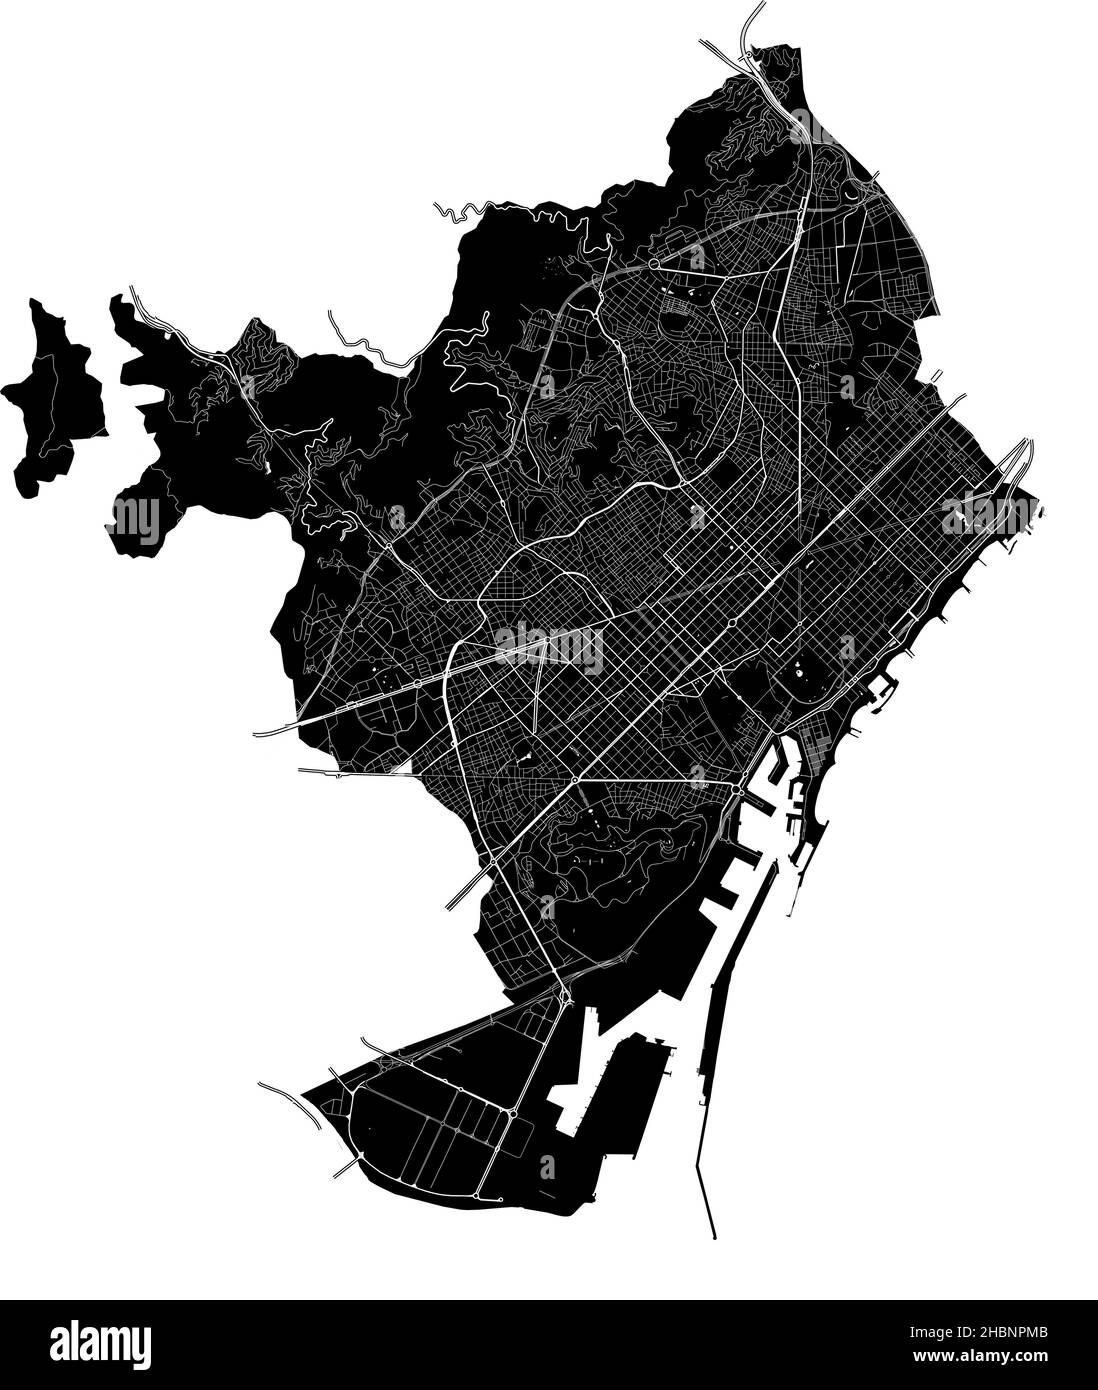 Barcelona, Spain, high resolution vector map with city boundaries, and editable paths. The city map was drawn with white areas and lines for main road Stock Vector